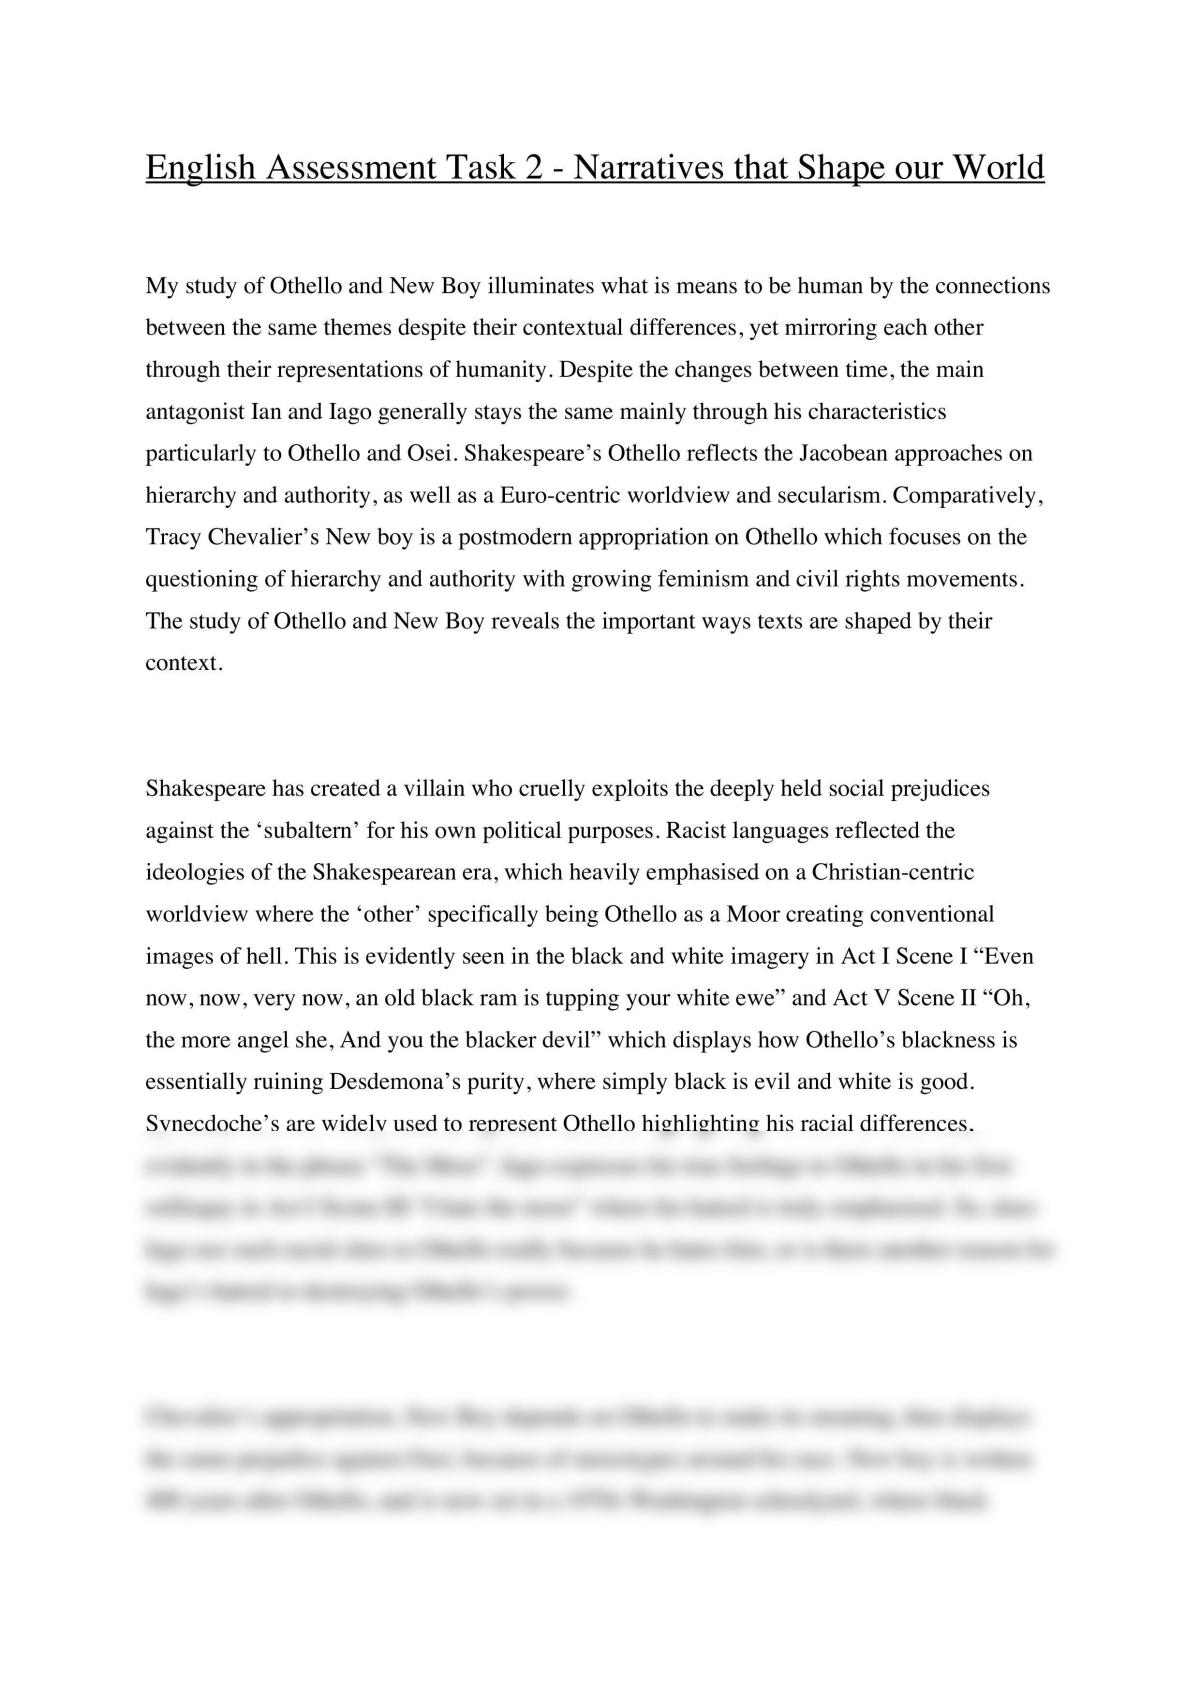 Narratives that shape our World - Othello and New Boy Speech - Page 1